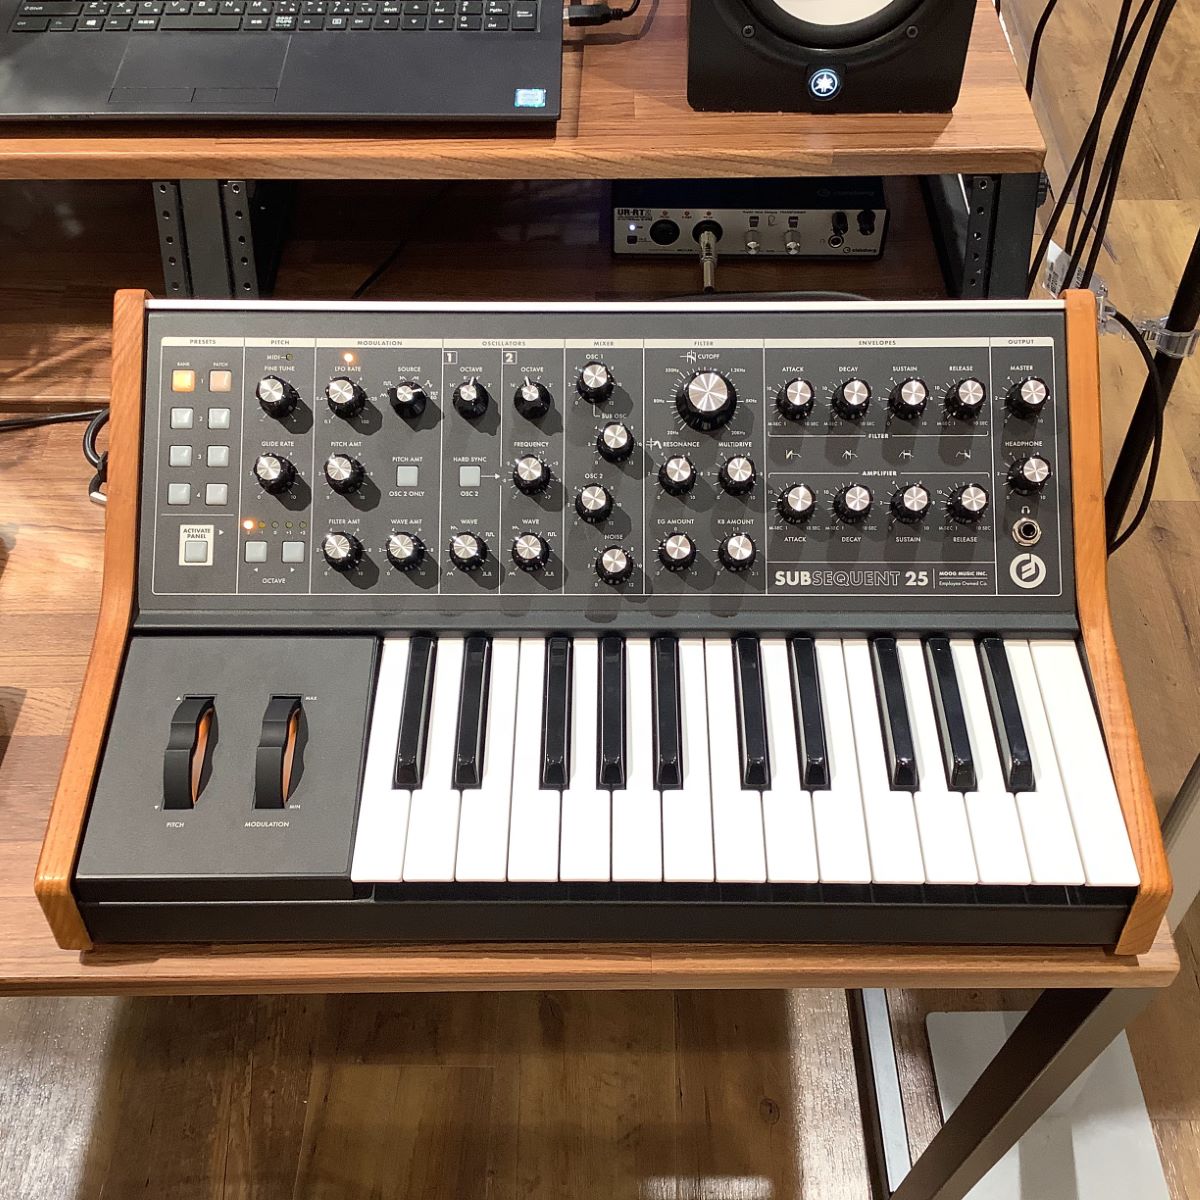 moog Subsequent 25 パラフォニックアナログシンセサイザー 25鍵盤